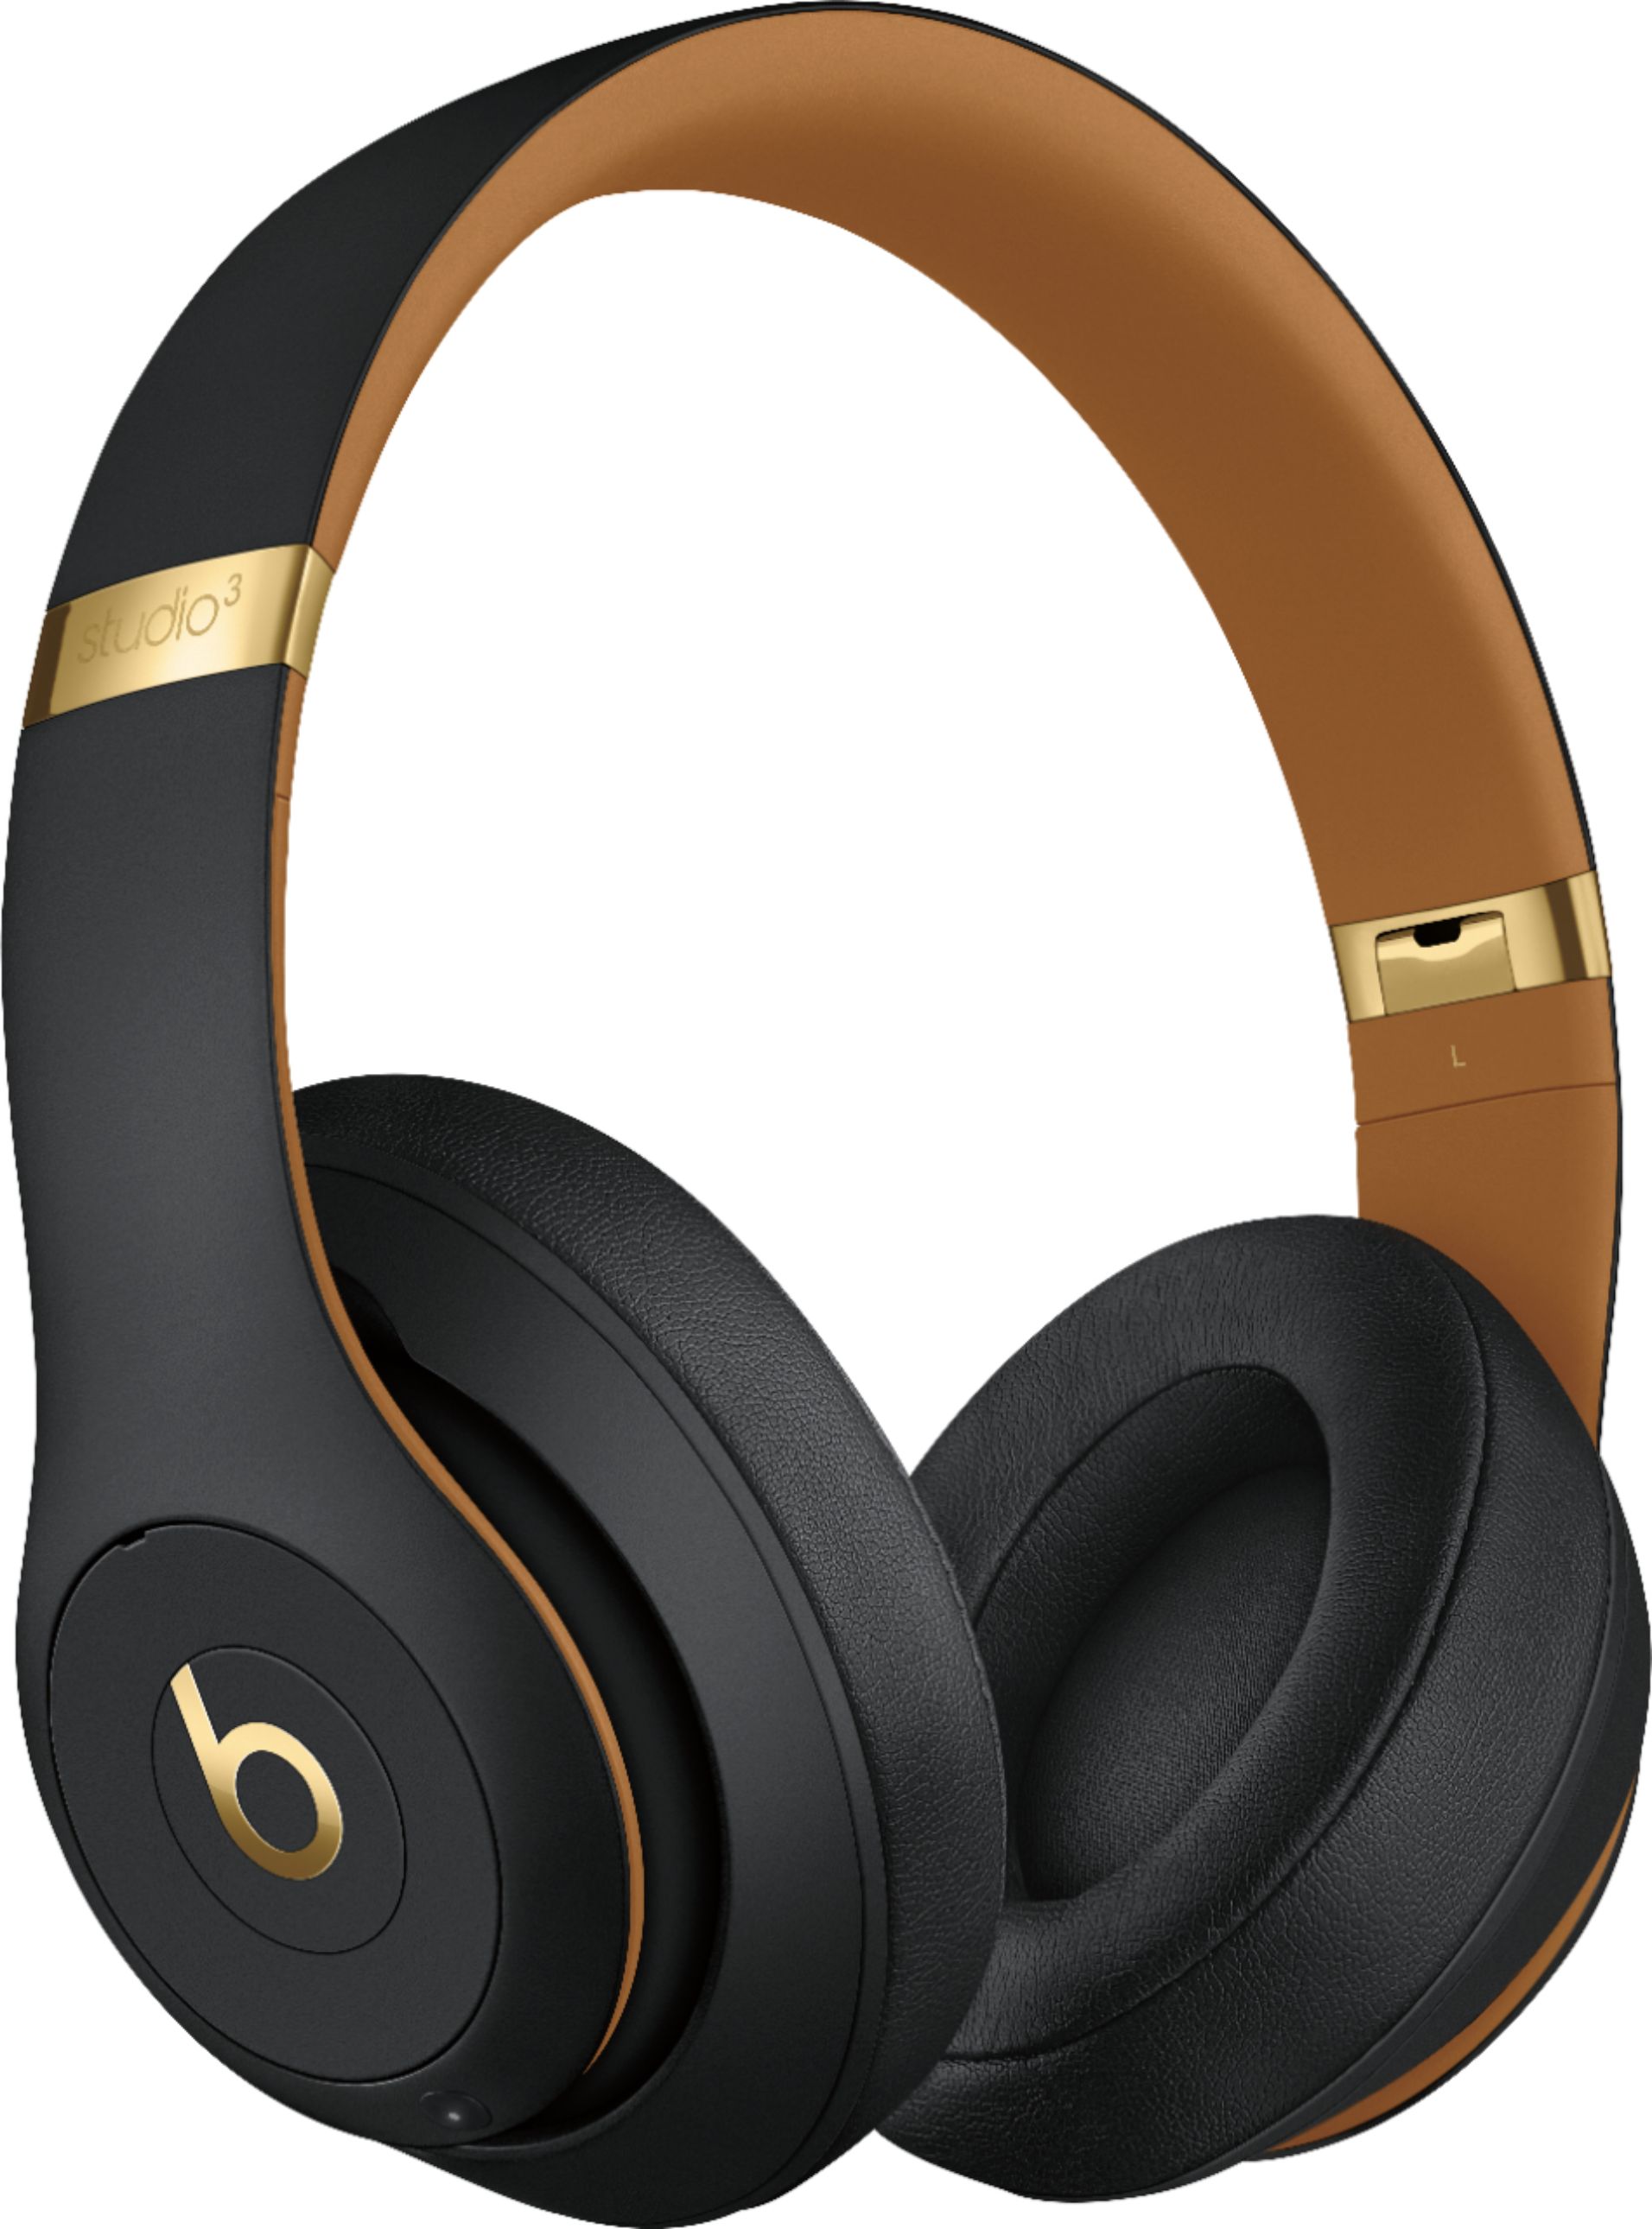 Angle View: Beats by Dr. Dre - Geek Squad Certified Refurbished Beats Studio³ Wireless Noise Cancelling Headphones - Beats Skyline Collection - Midnight Black